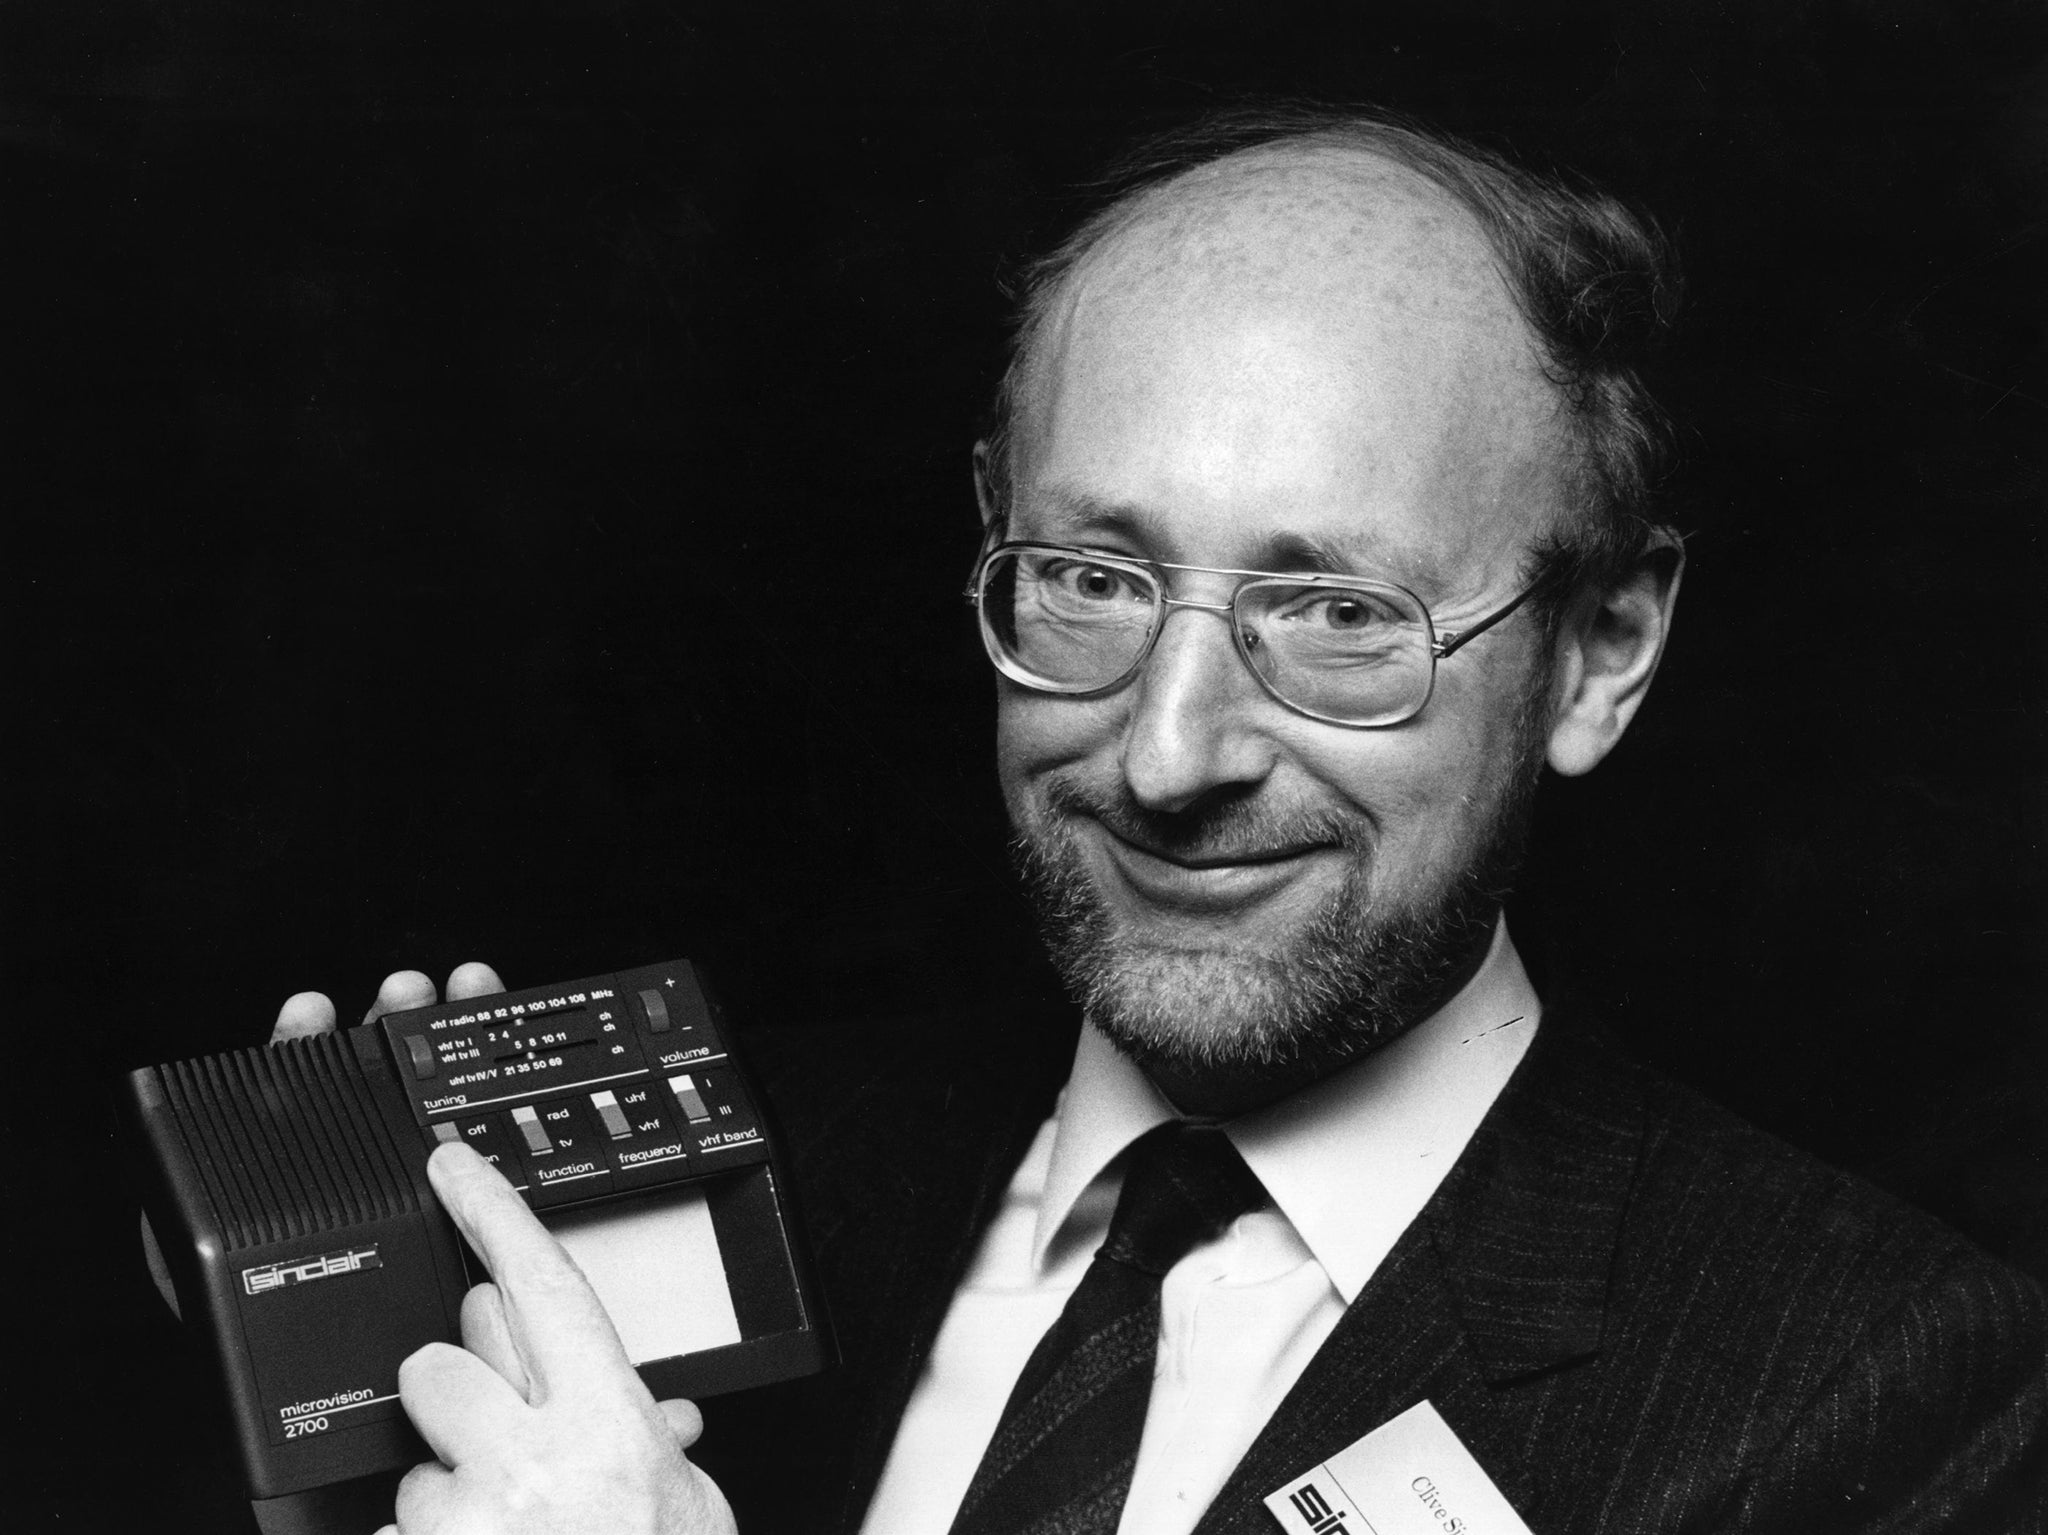 Sir Clive holds a prototype of a new multi-standard flat screen television in 1981